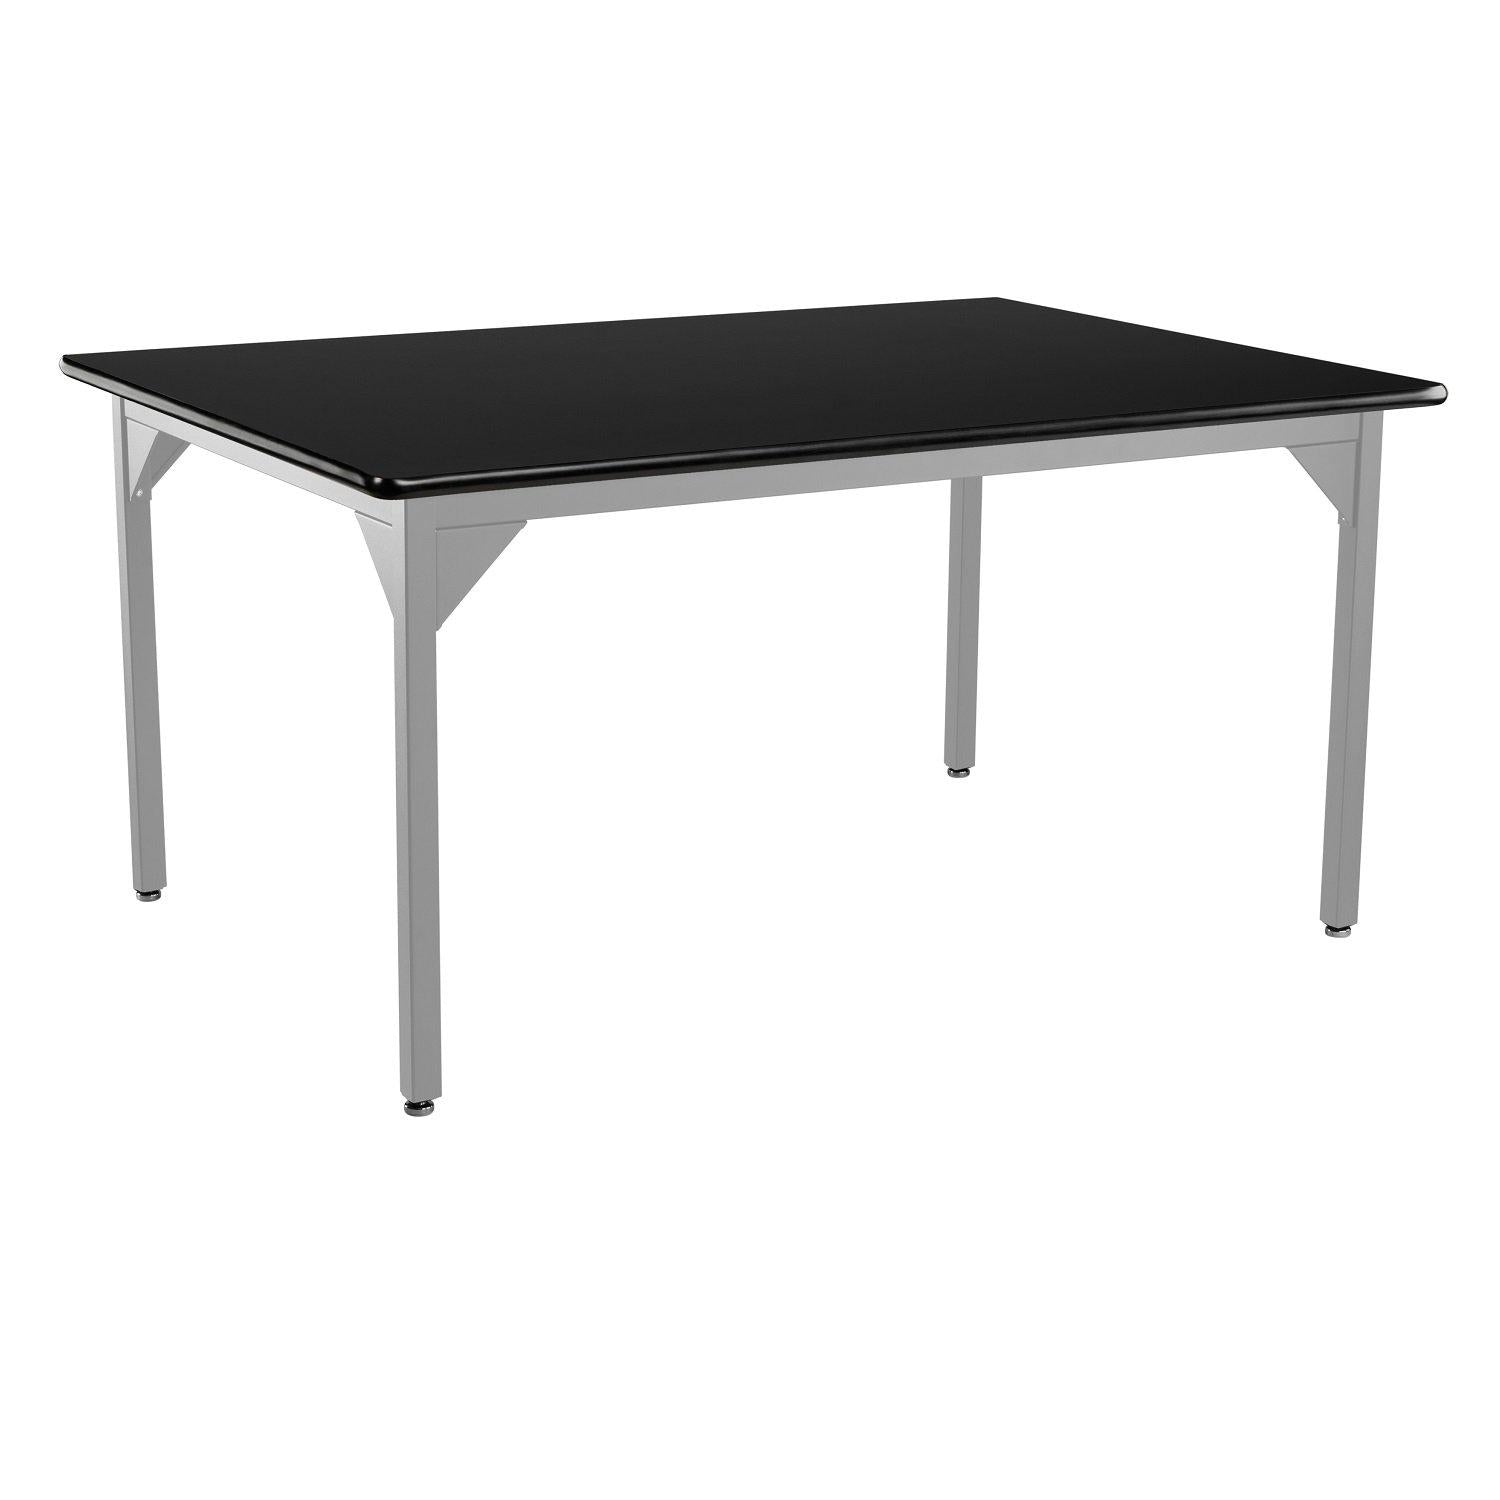 Heavy-Duty Fixed Height Utility Table, Soft Grey Frame, 42" x 60", High-Pressure Laminate Top with T-Mold Edge